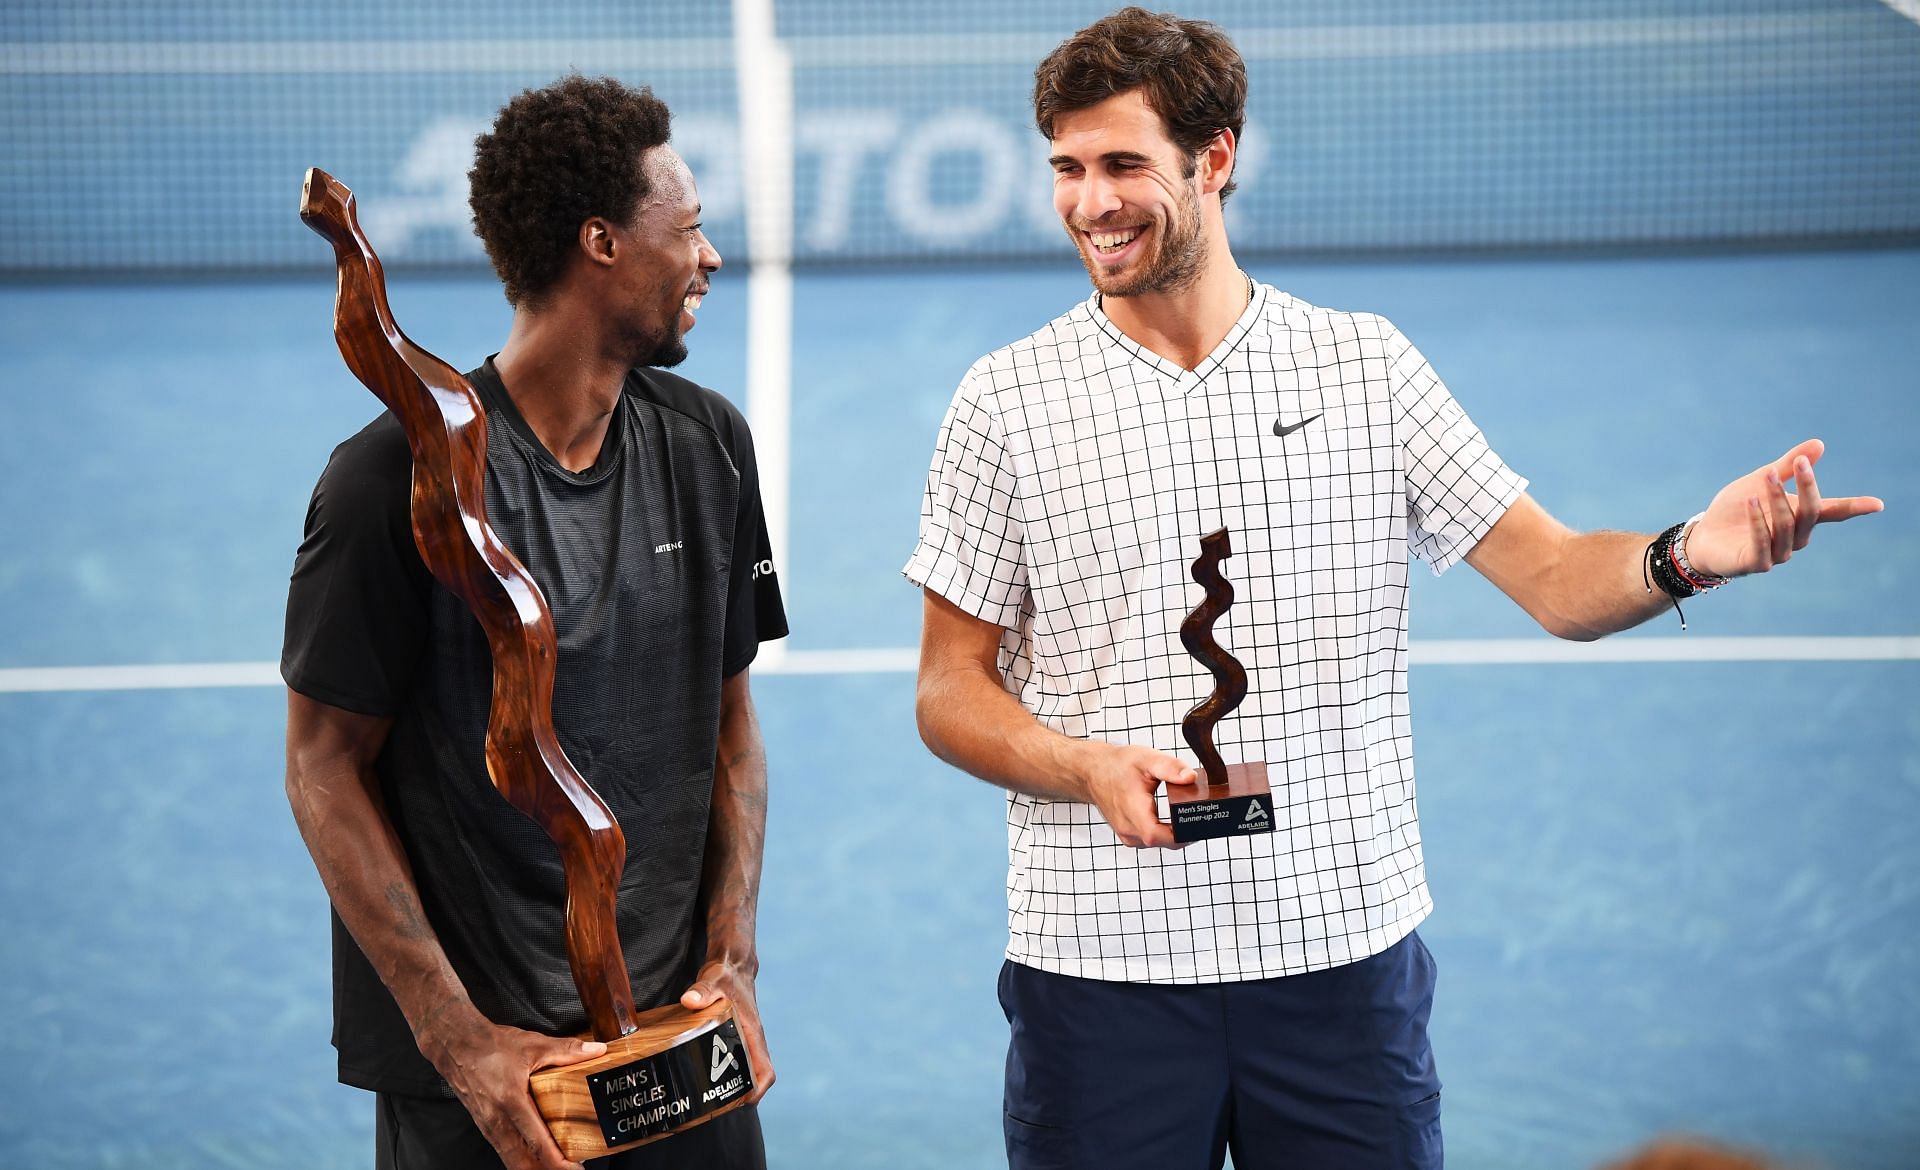 Gael Monfils won the 11th title of his career at the Adelaide International 1